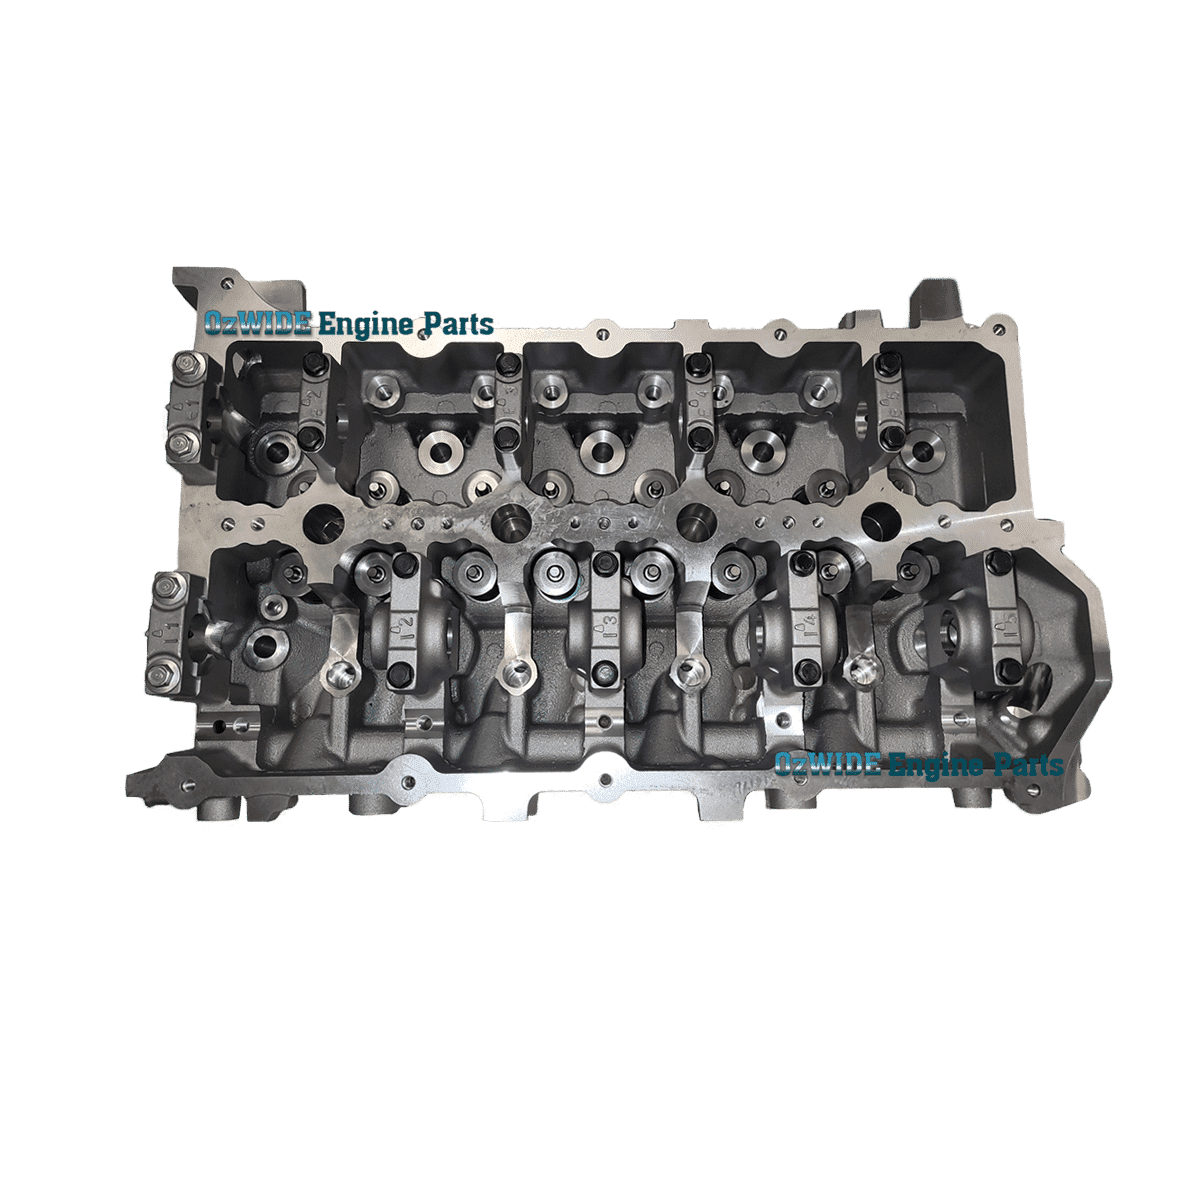 Large selection of new assembled semi complete cylinder heads for petrol and diesel engines.